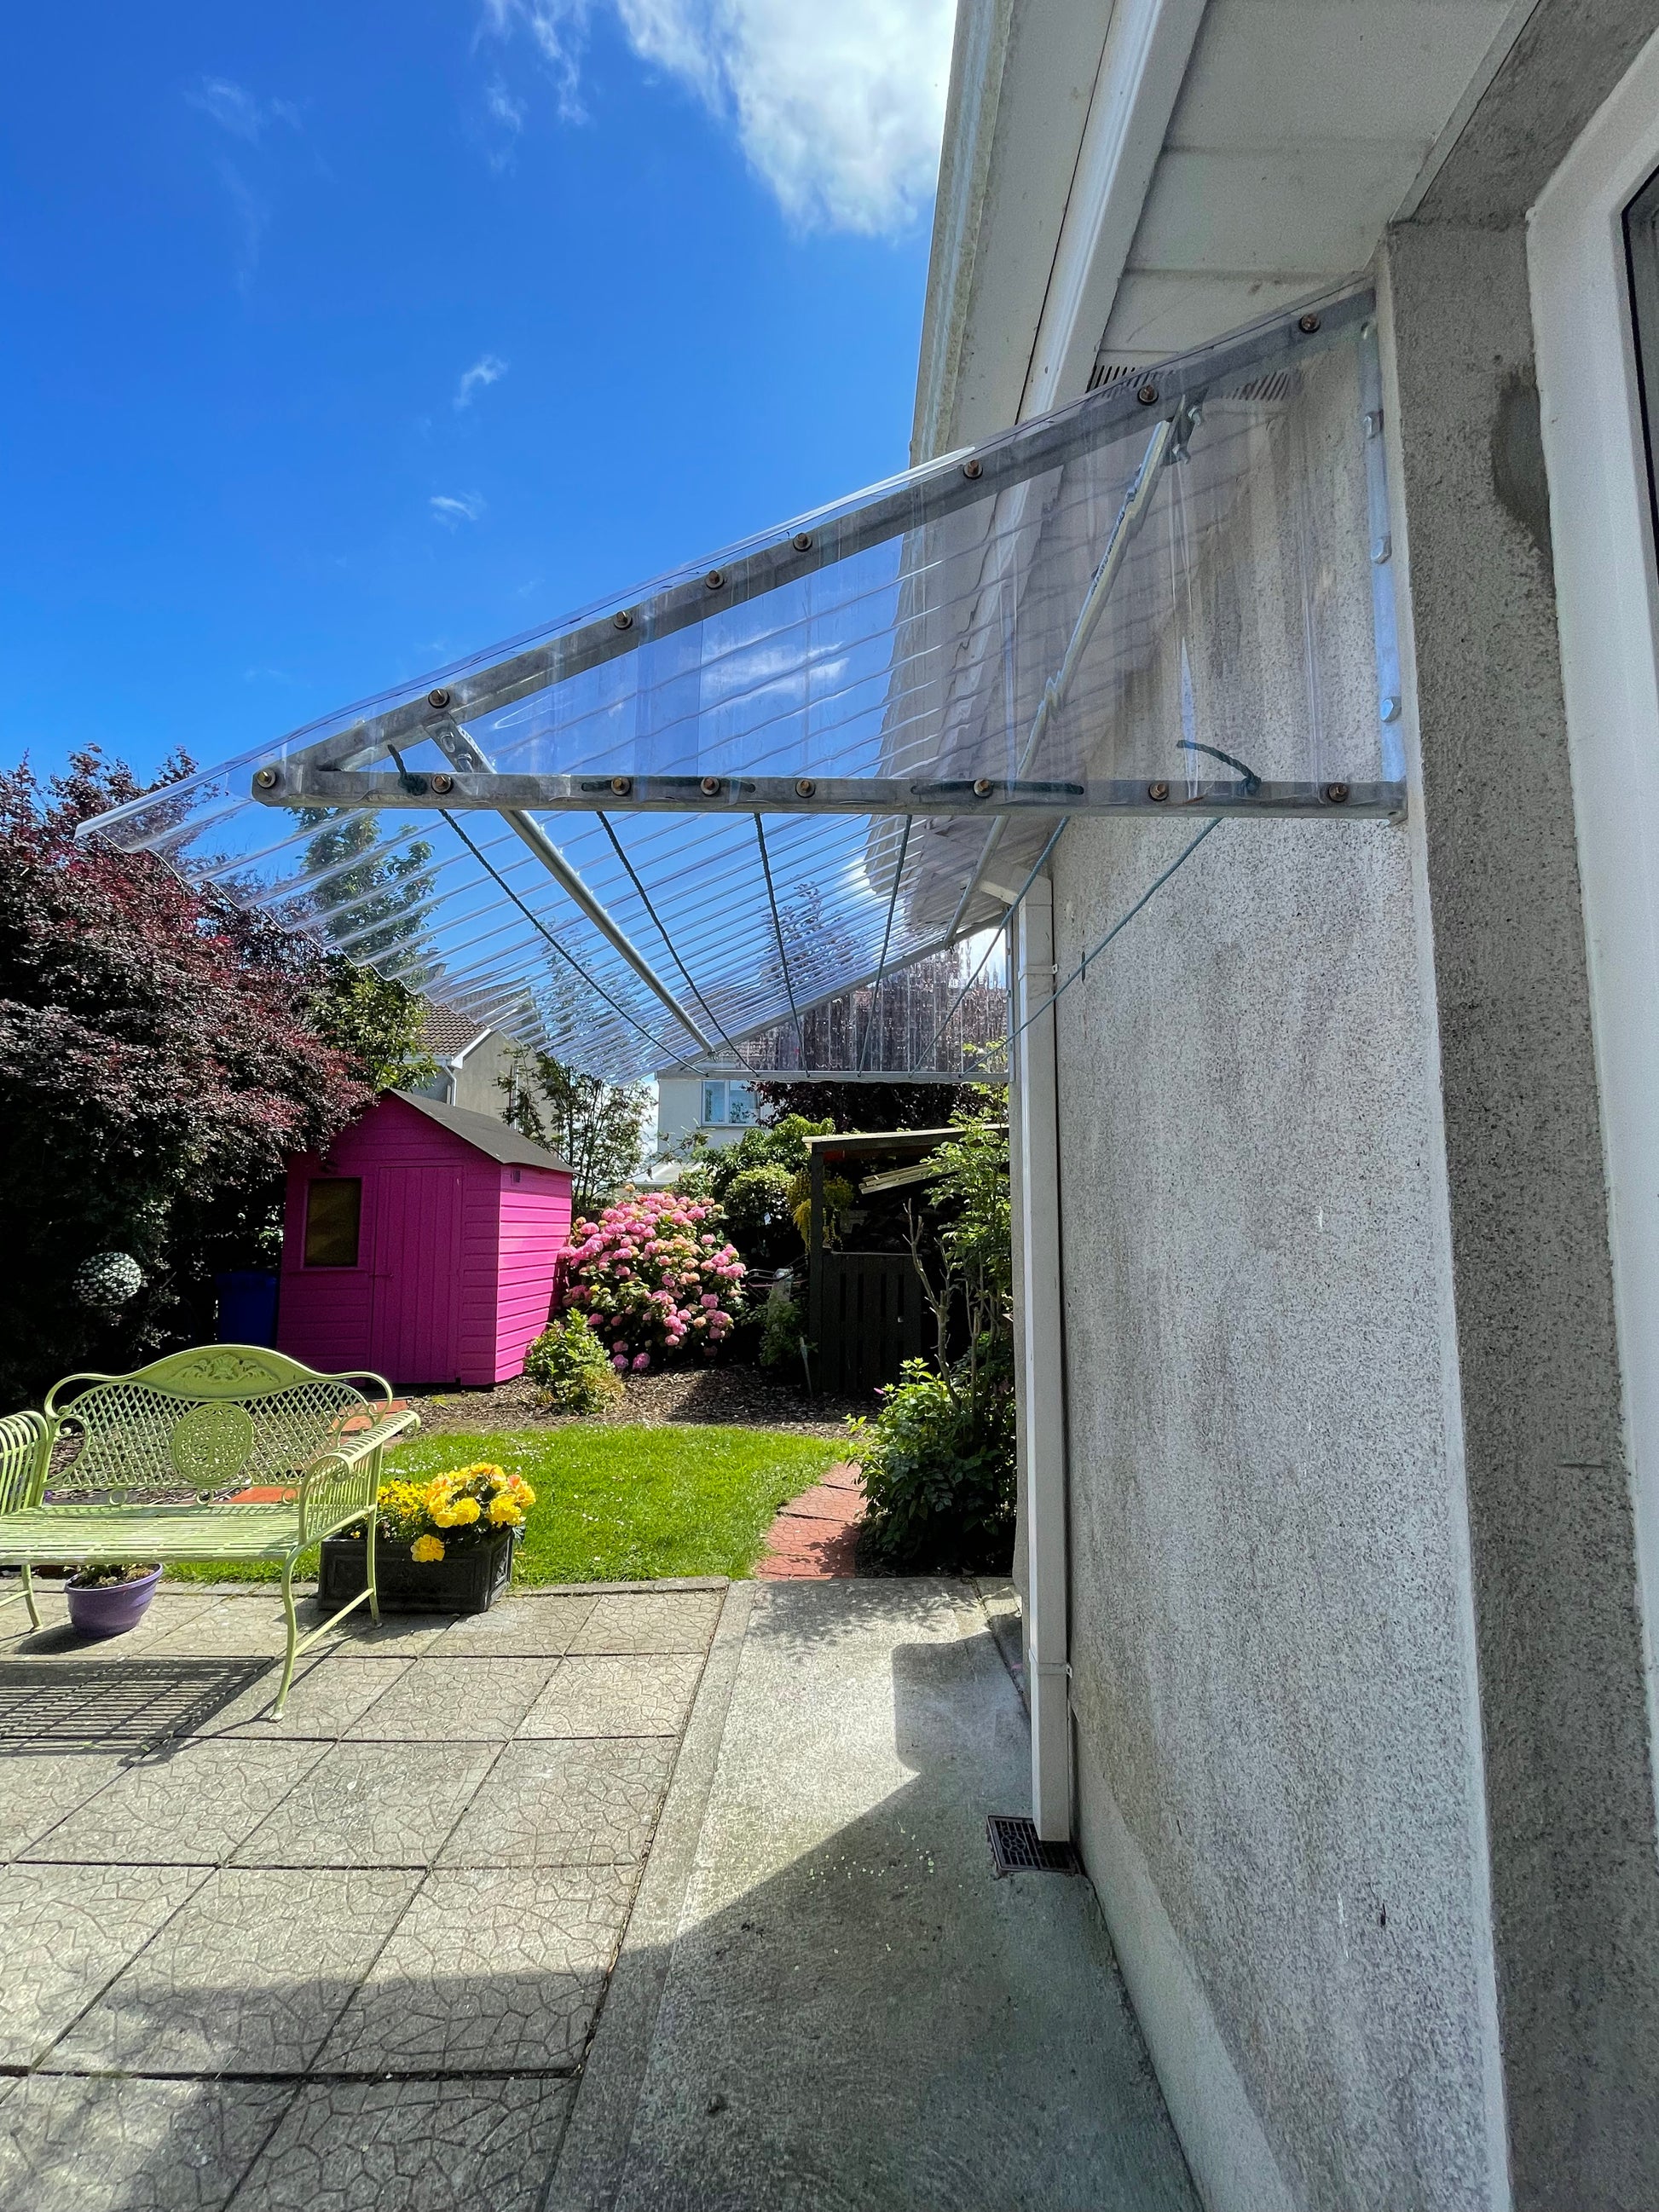 6ft canopy clothes line